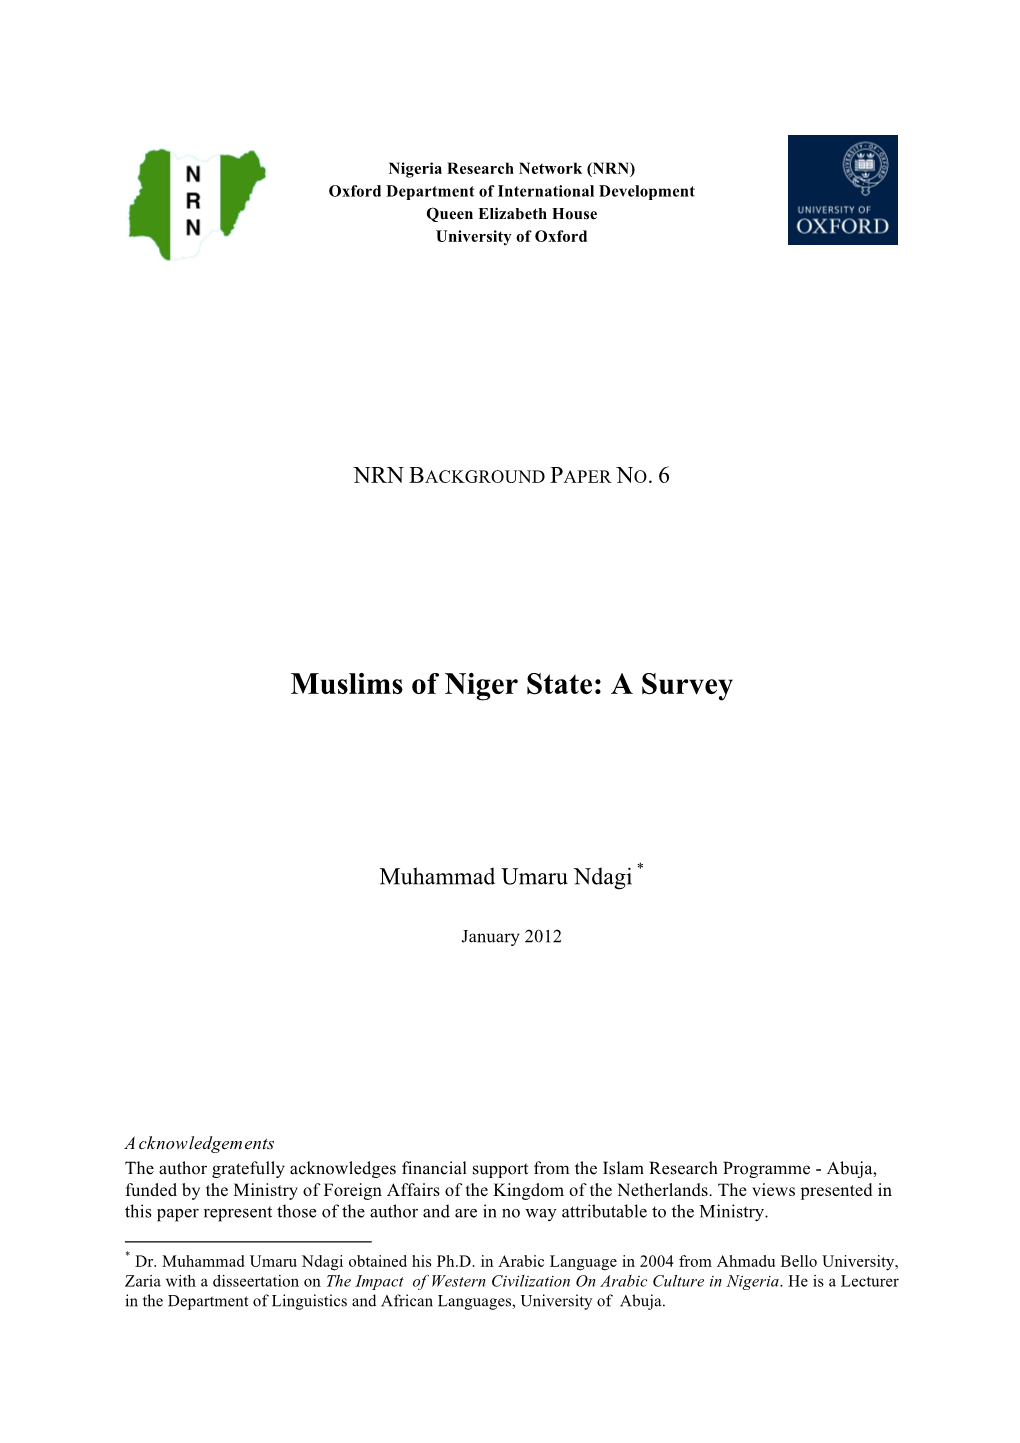 Muslims of Niger State: a Survey